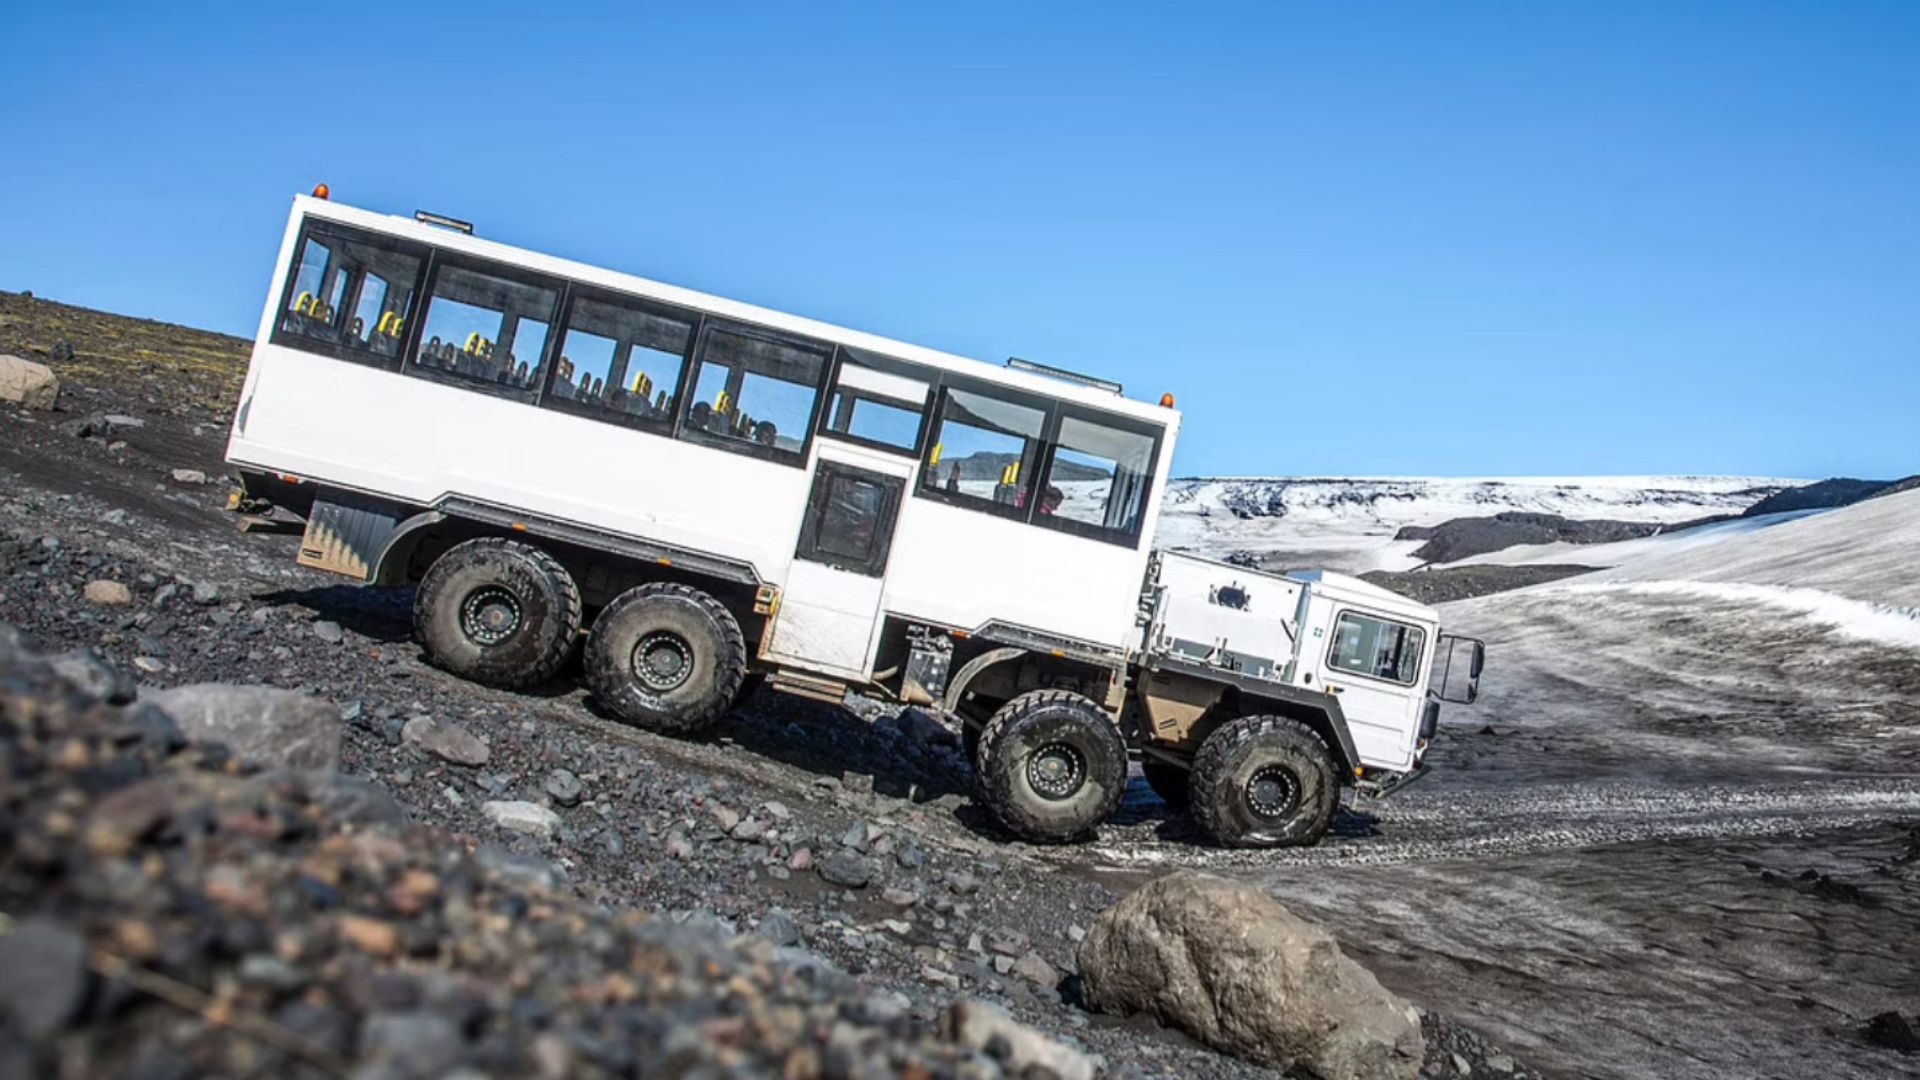 Super vehicle taking tourists to the glacier in Iceland